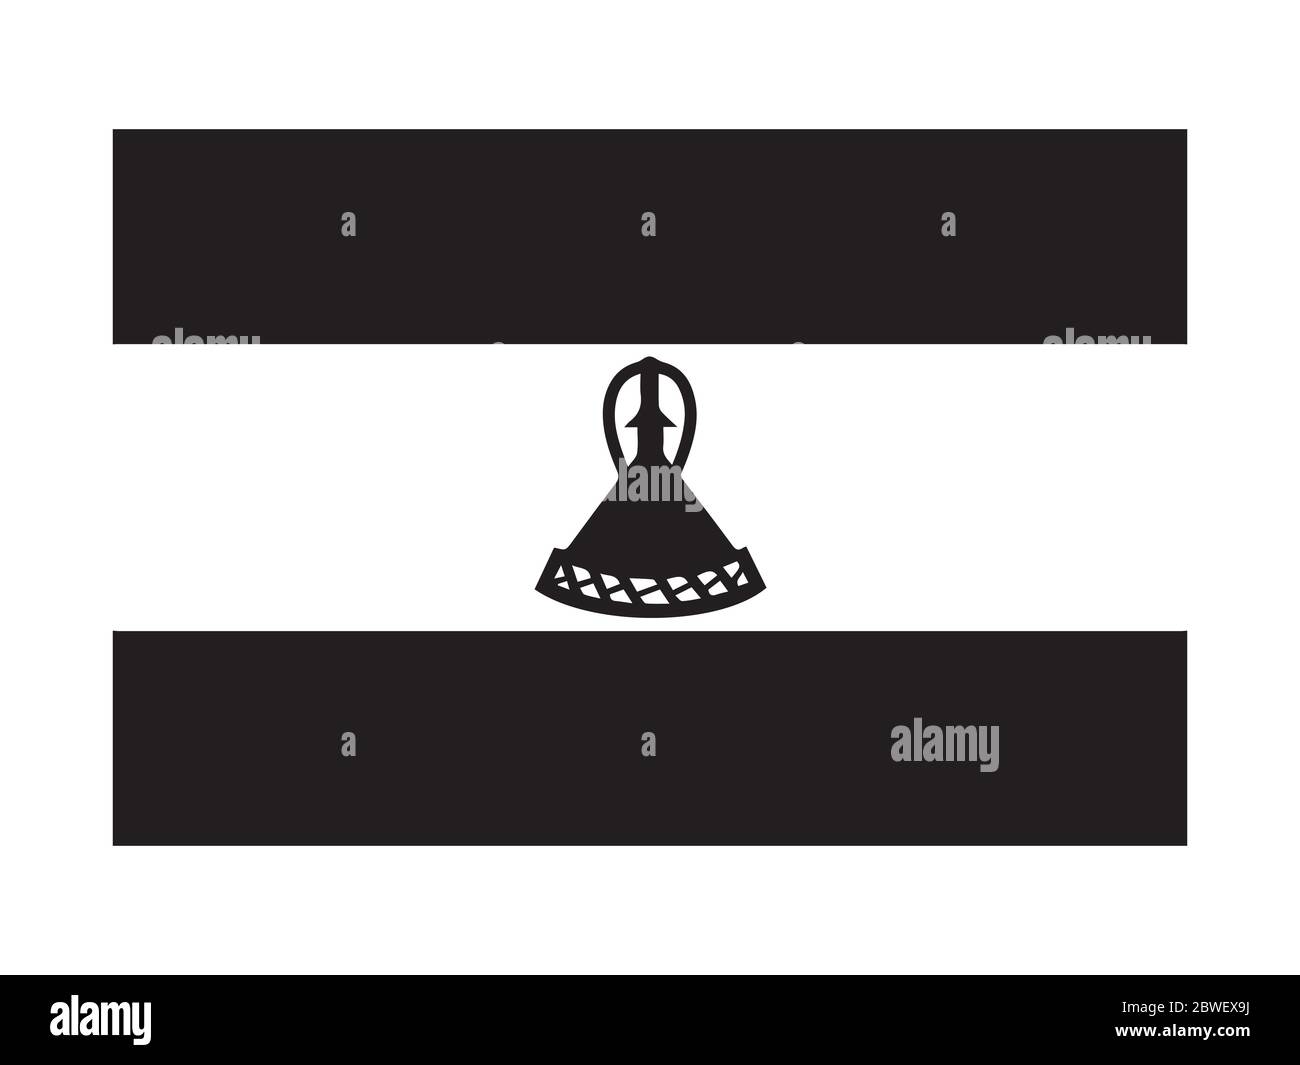 Lesotho Flag Black and White. Country National Emblem Banner. Monochrome Grayscale EPS Vector File. Stock Vector